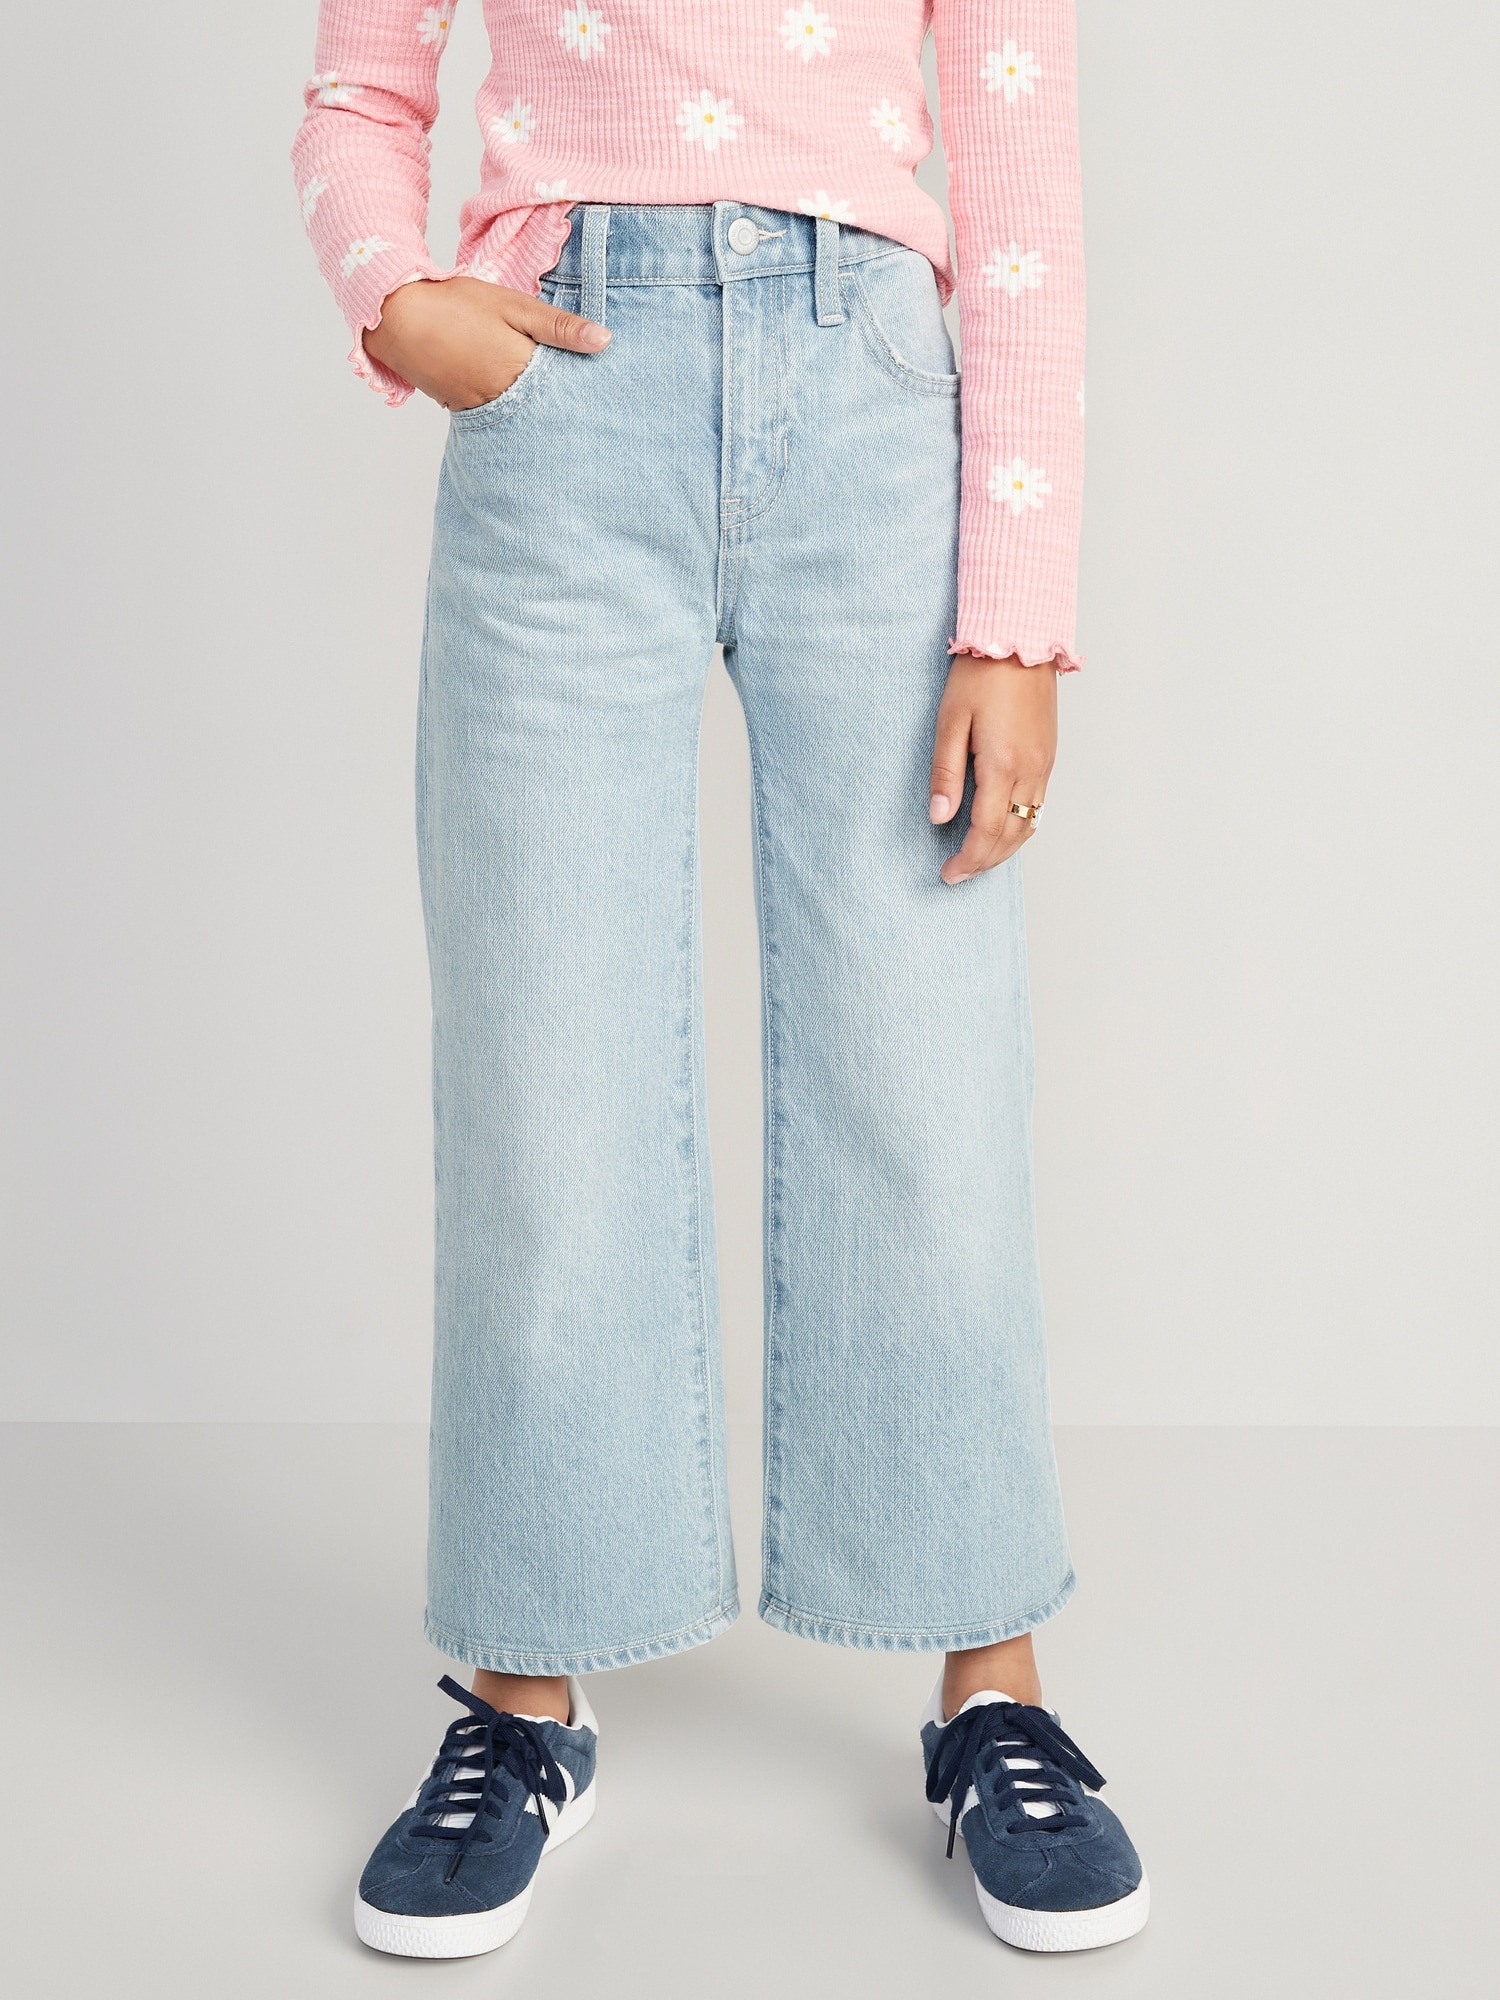 Perpetrator Settlers harm High-Waisted Baggy Wide-Leg Jeans for Girls | Old Navy